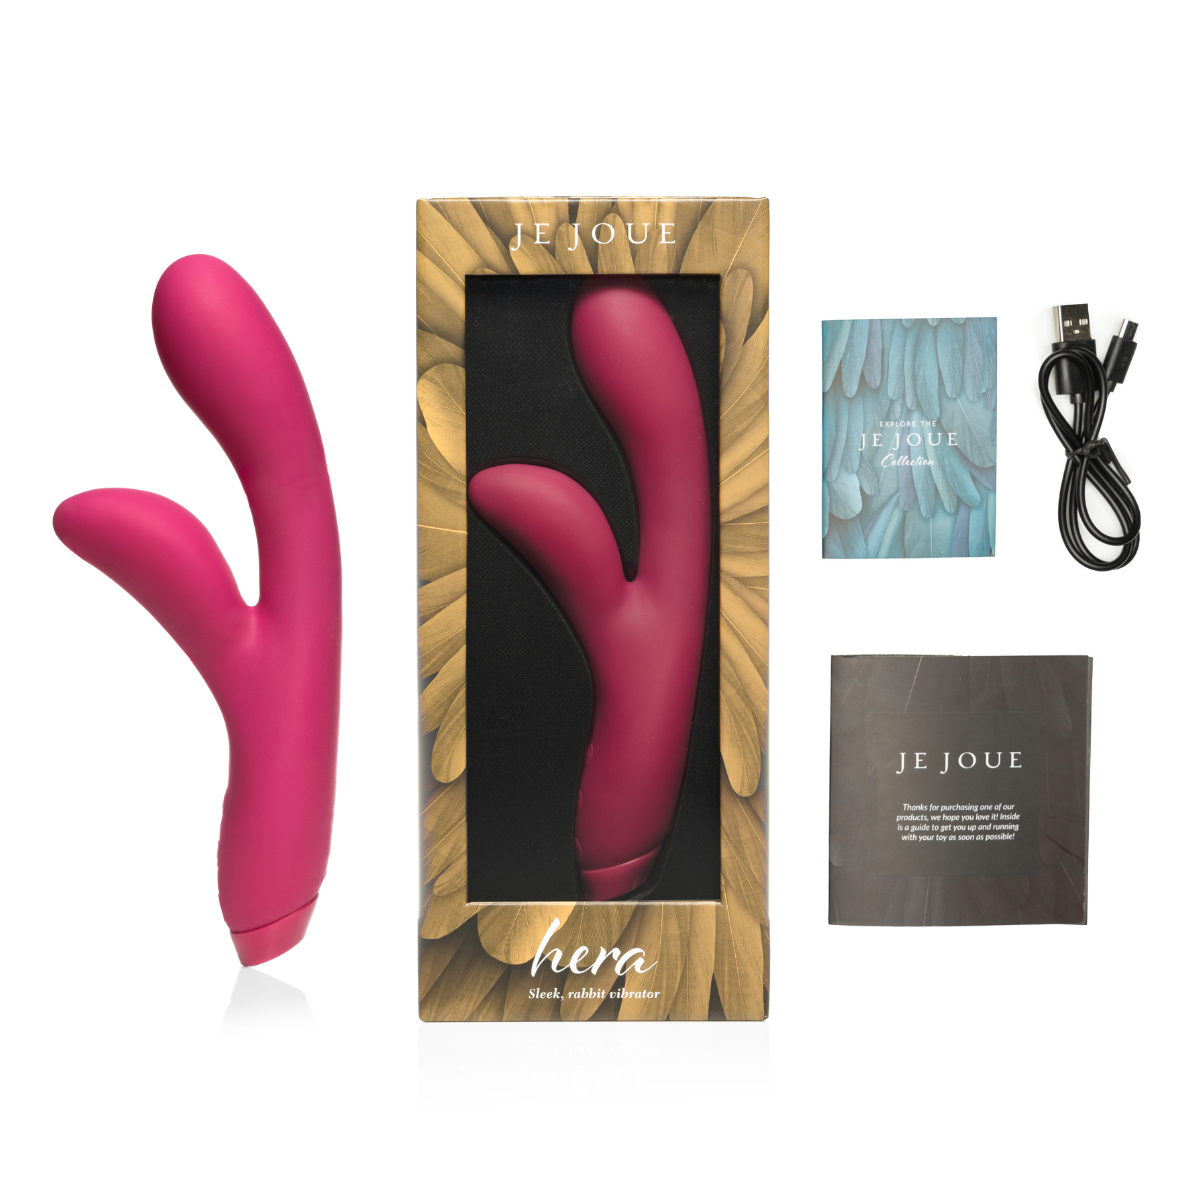 Hera Vibrator in box with accessories on white background